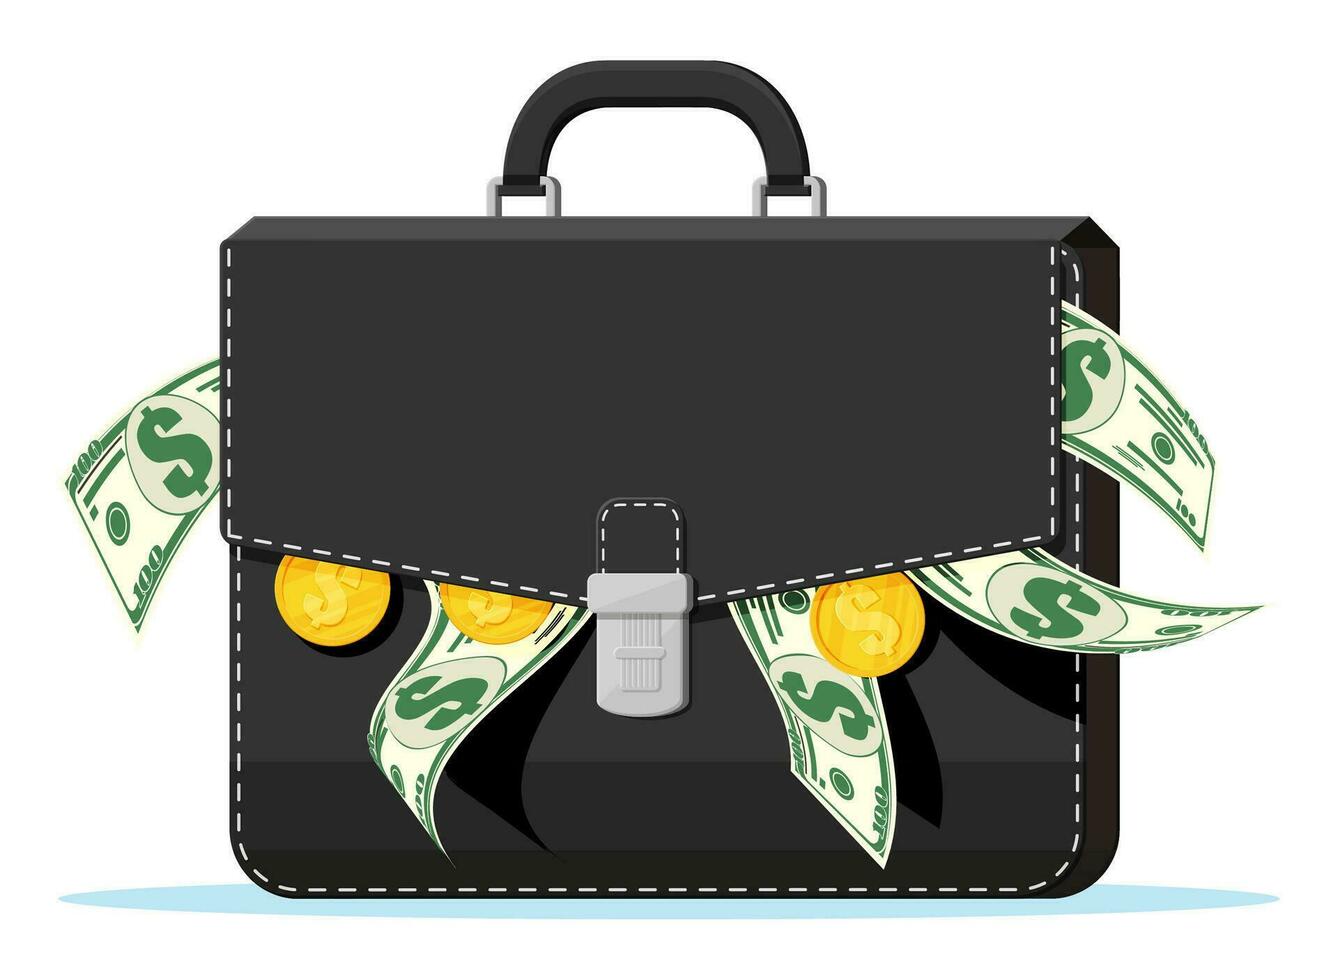 Leather suitcase full of money. Dollar banknotes. golden coins and case. Symbol of wealth. Business success. Stock market investment portfolio. Flat style vector illustration.